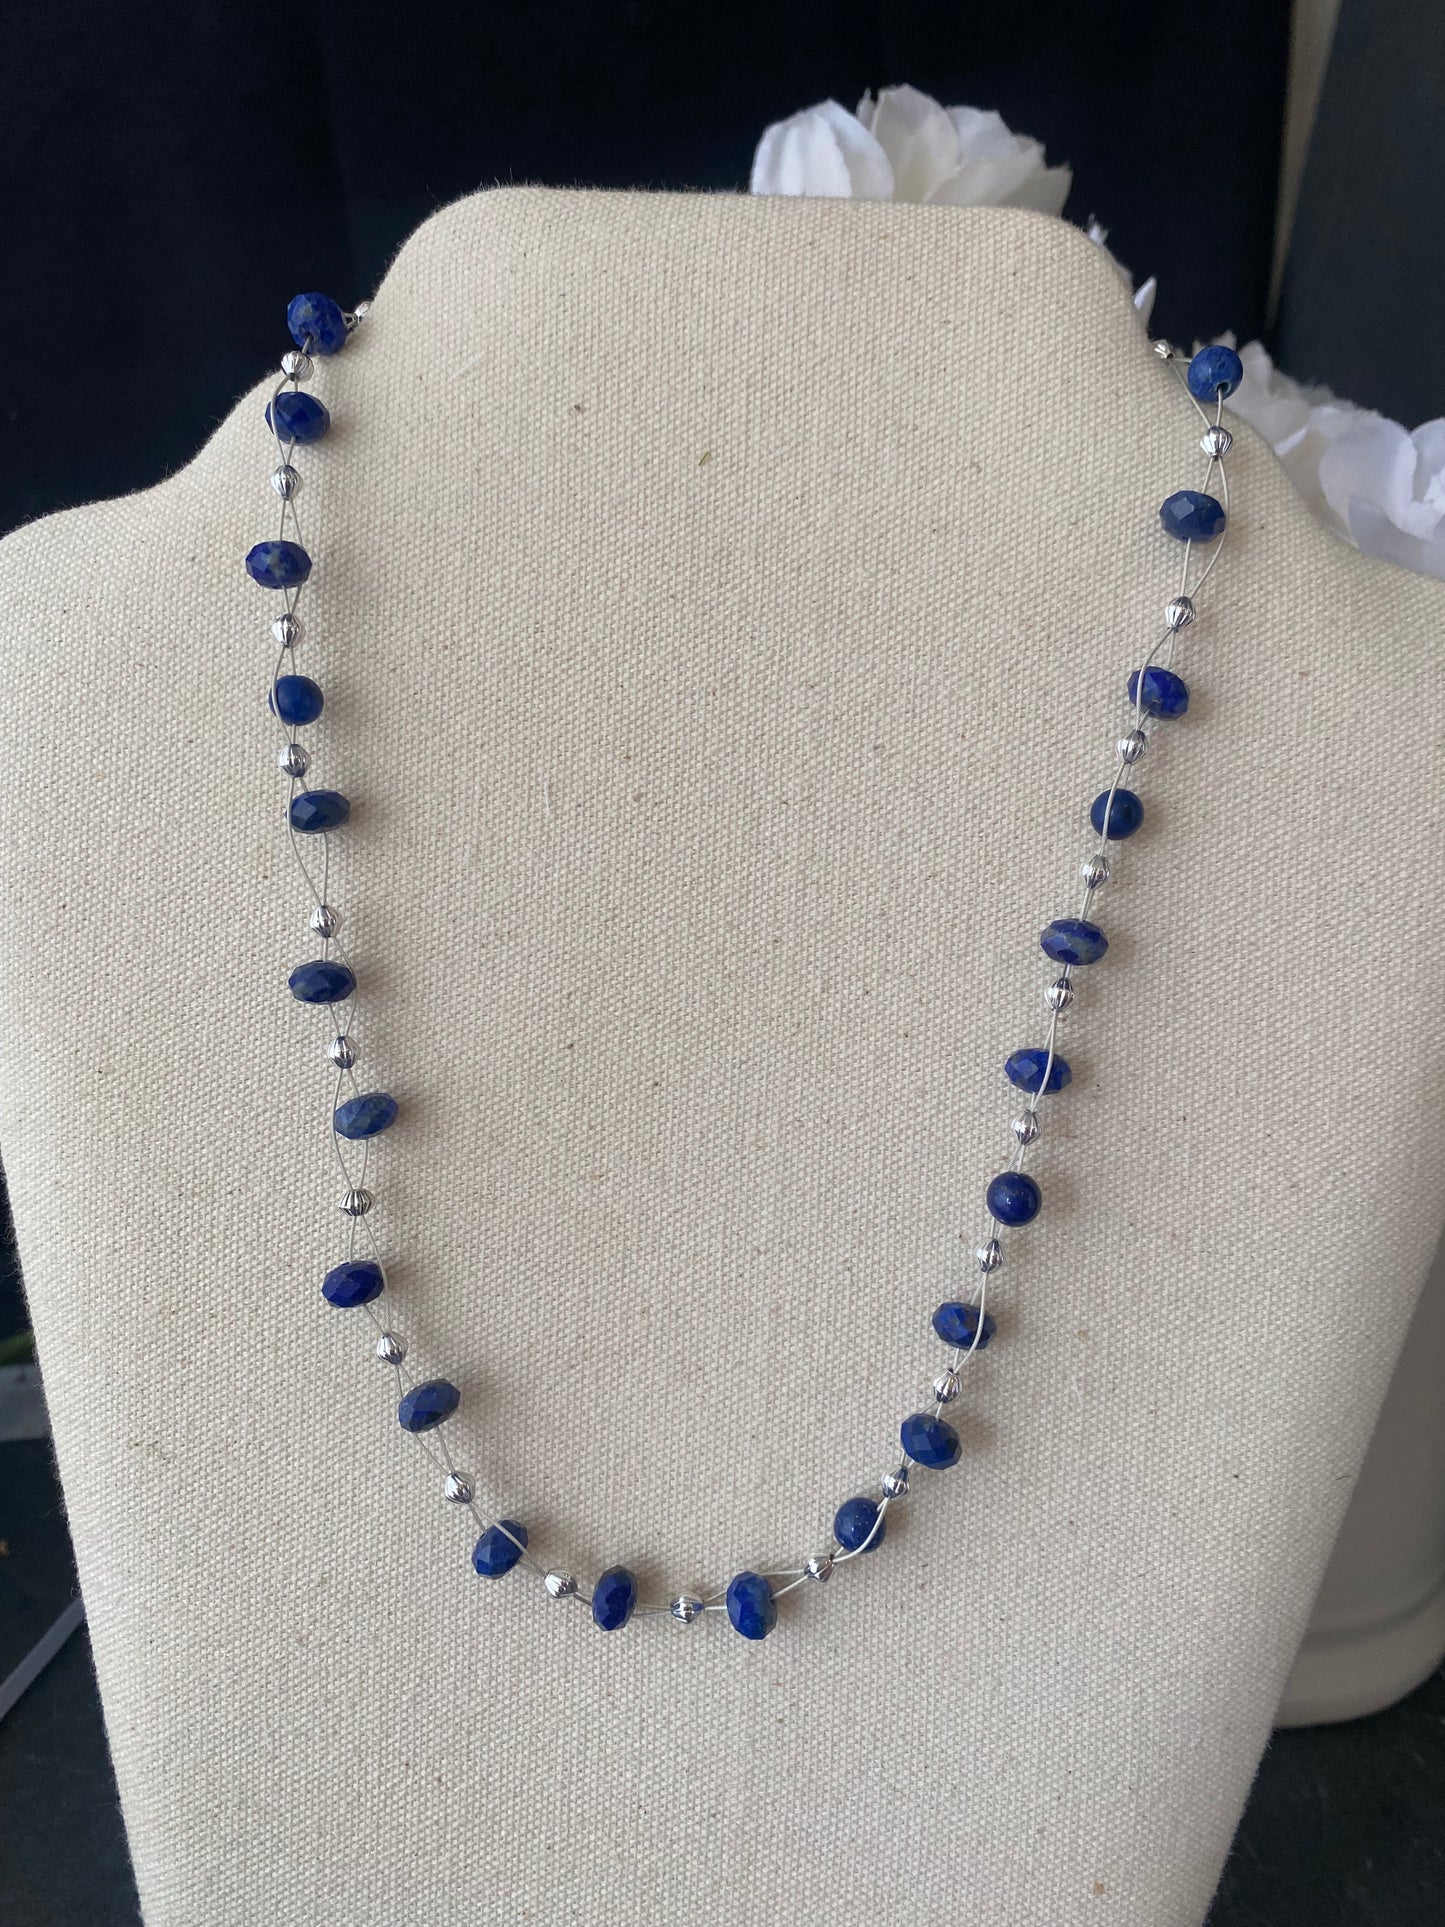 Lapis lazuli stone, sterling silver wire, floating necklace, jewelry